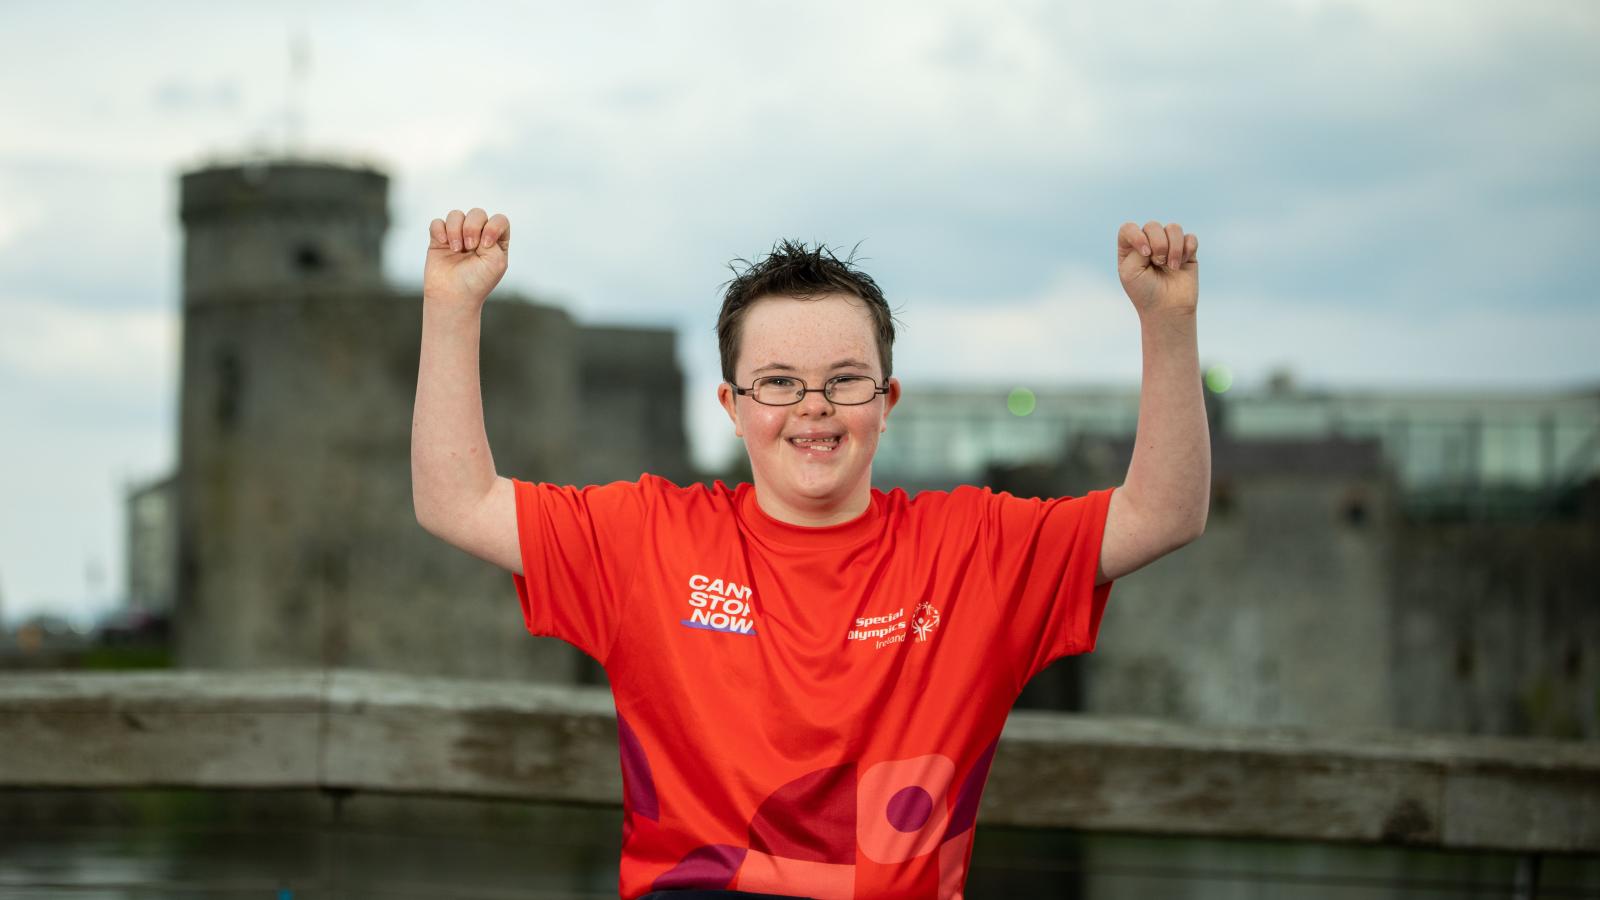 Padraig O'Callaghan is asking you to support Special Olympics Annual Collection Day which takes place today